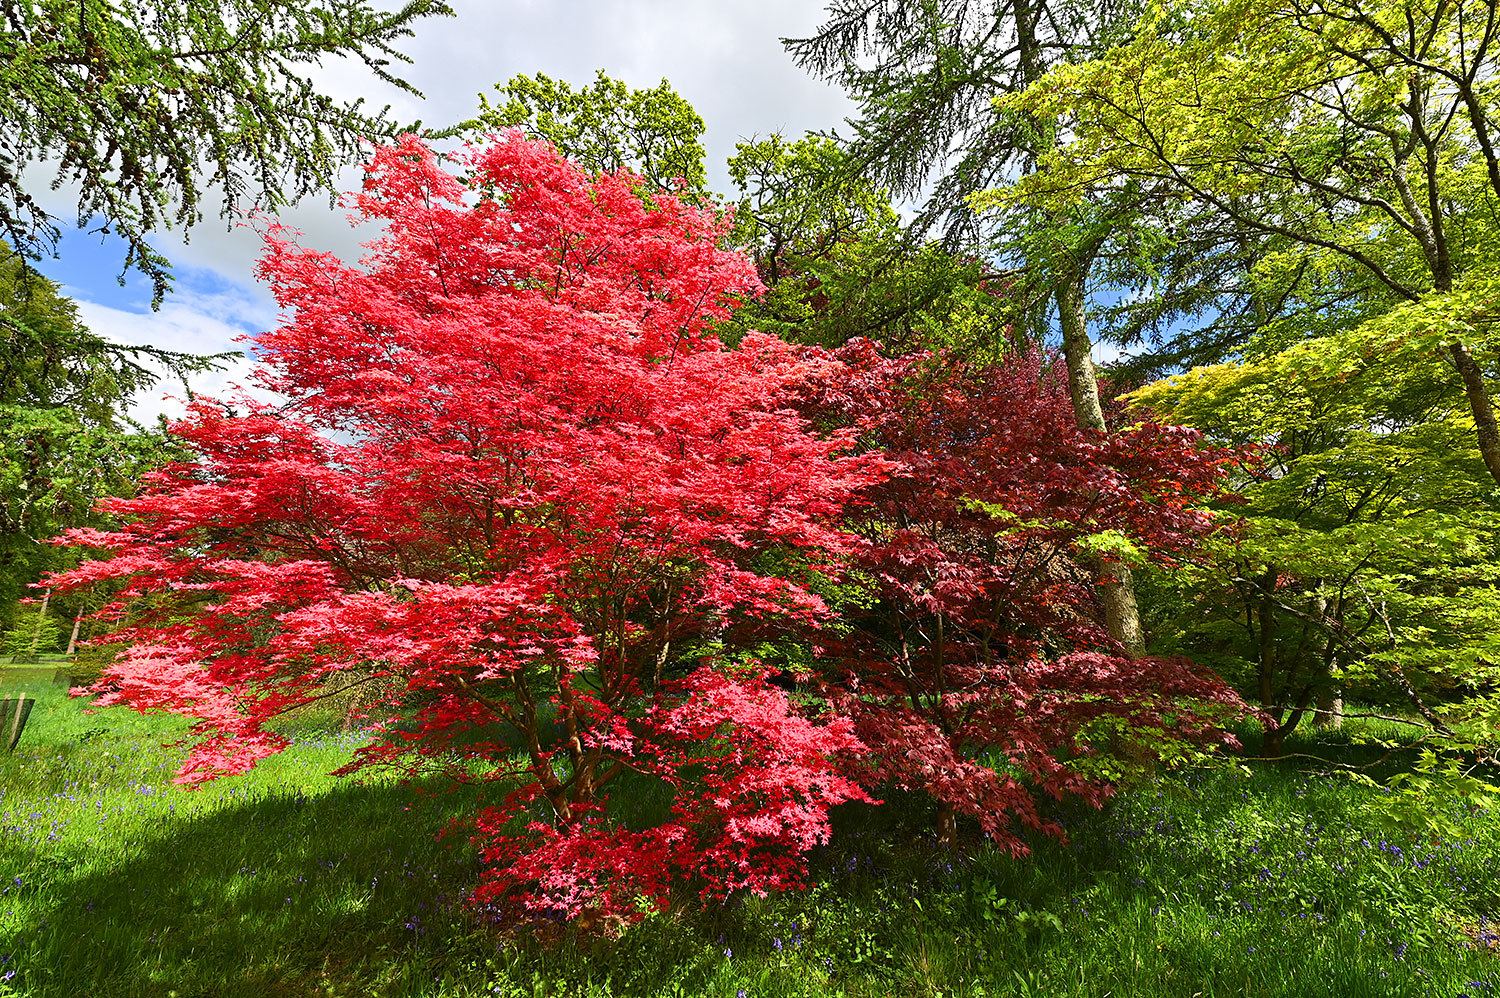 Picture of trees in various shades of red and green leaves